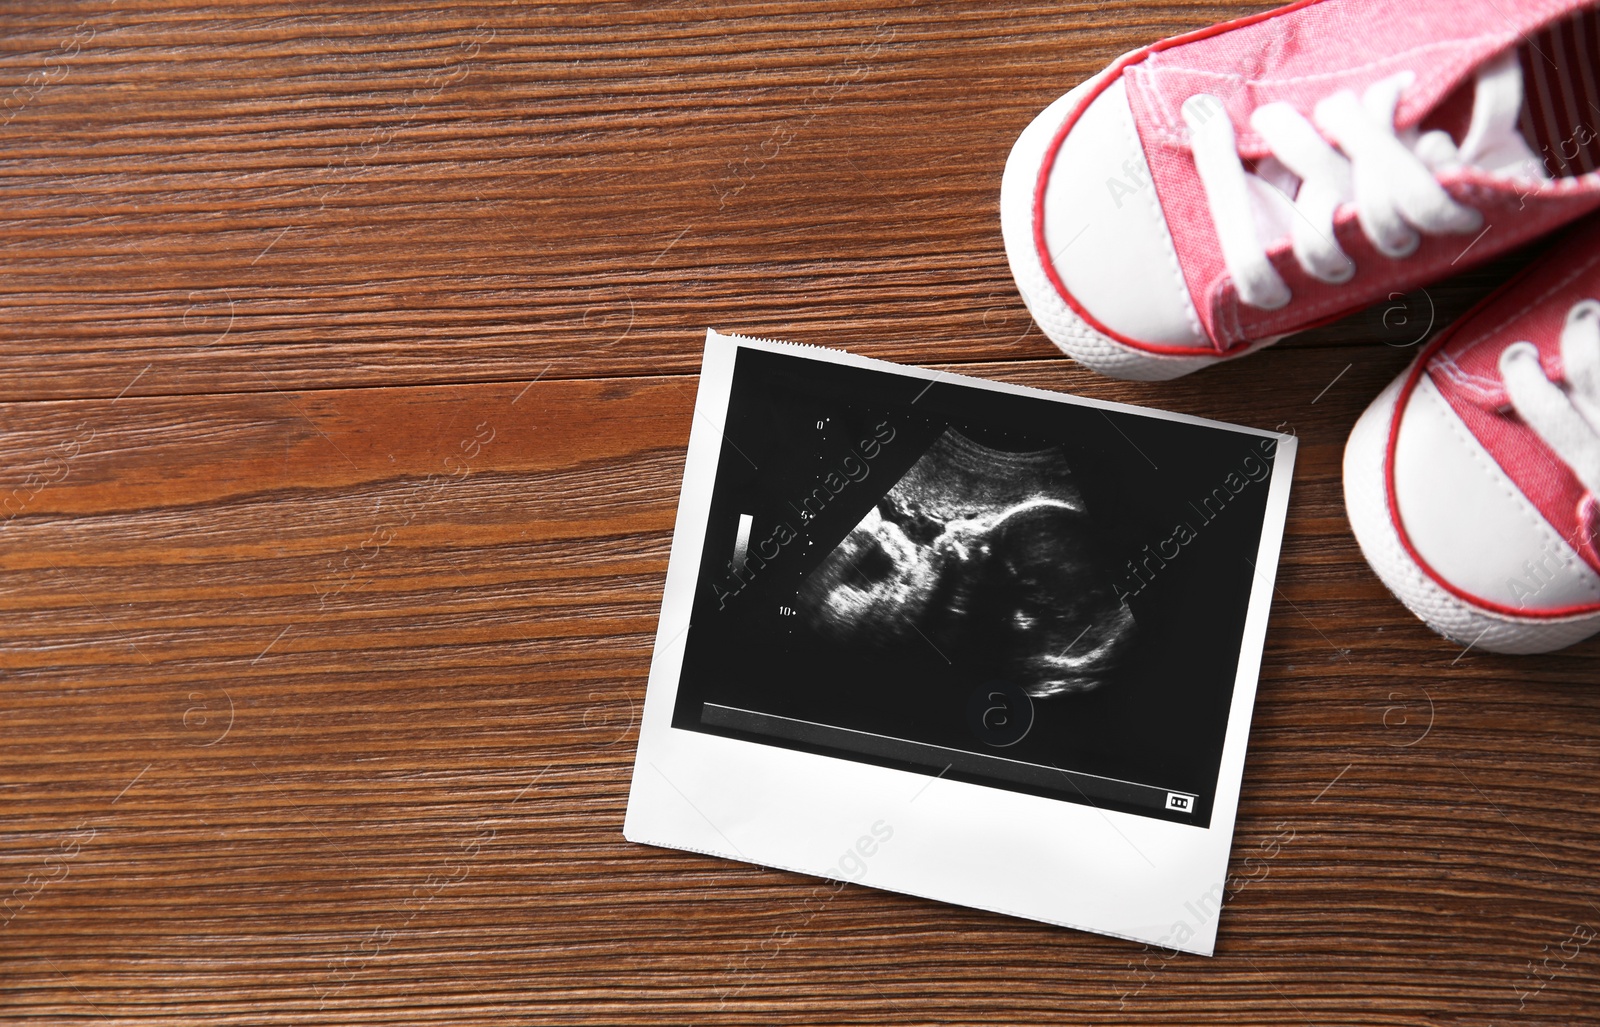 Photo of Ultrasound picture and baby shoes on wooden background, top view with space for text